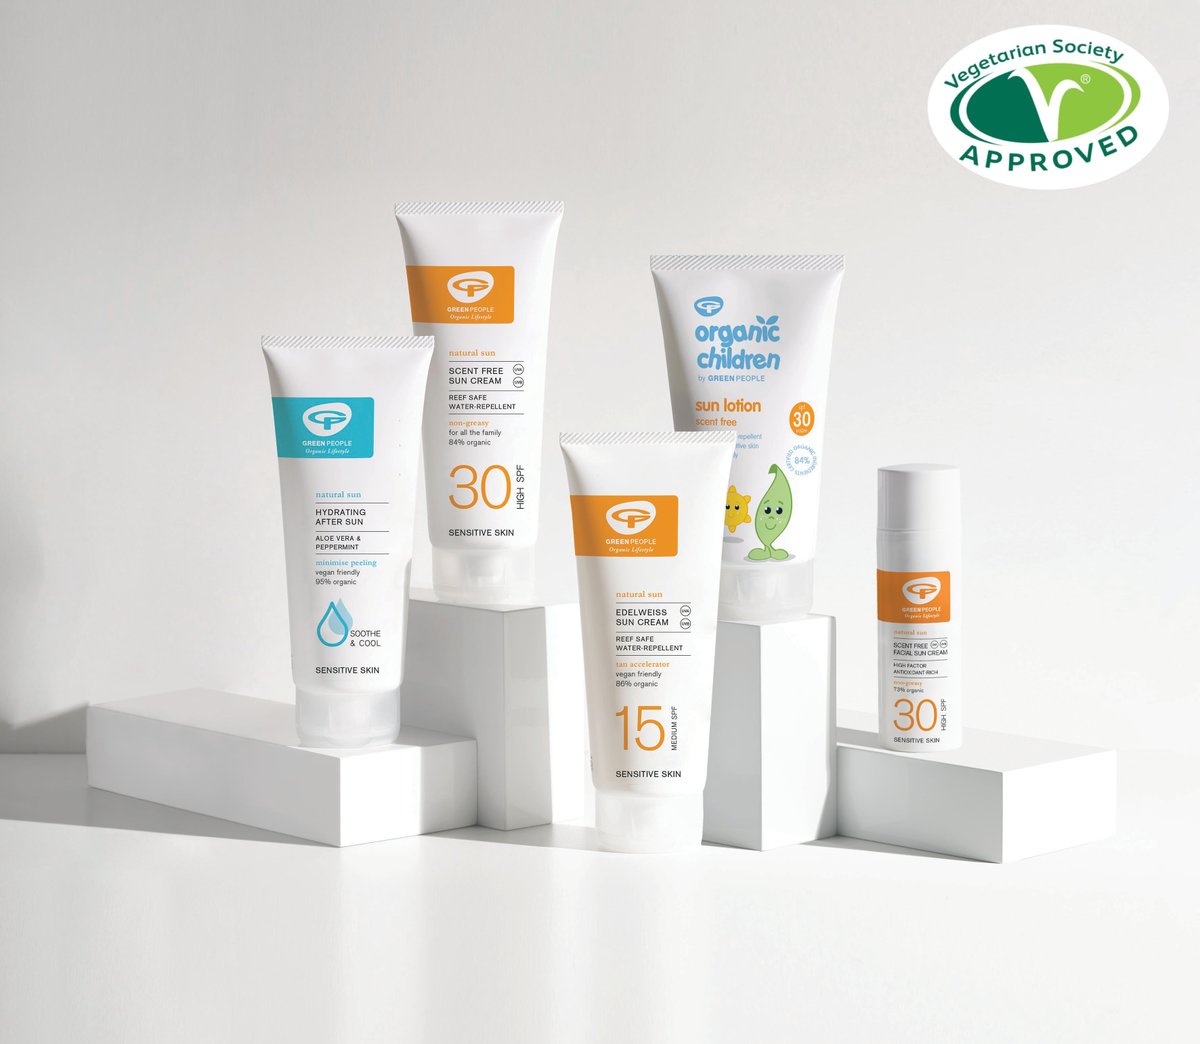 Shield your skin from the sun's rays with @GreenPeopleUK advanced SPF sun protection products🌤💛 Stay safe, stay radiant, every day☀️ #Vegetarian approved by @vegsoc🌱 #GreenPeople #SunProtection #NaturalBeauty #HealthySkin #Sunscreen